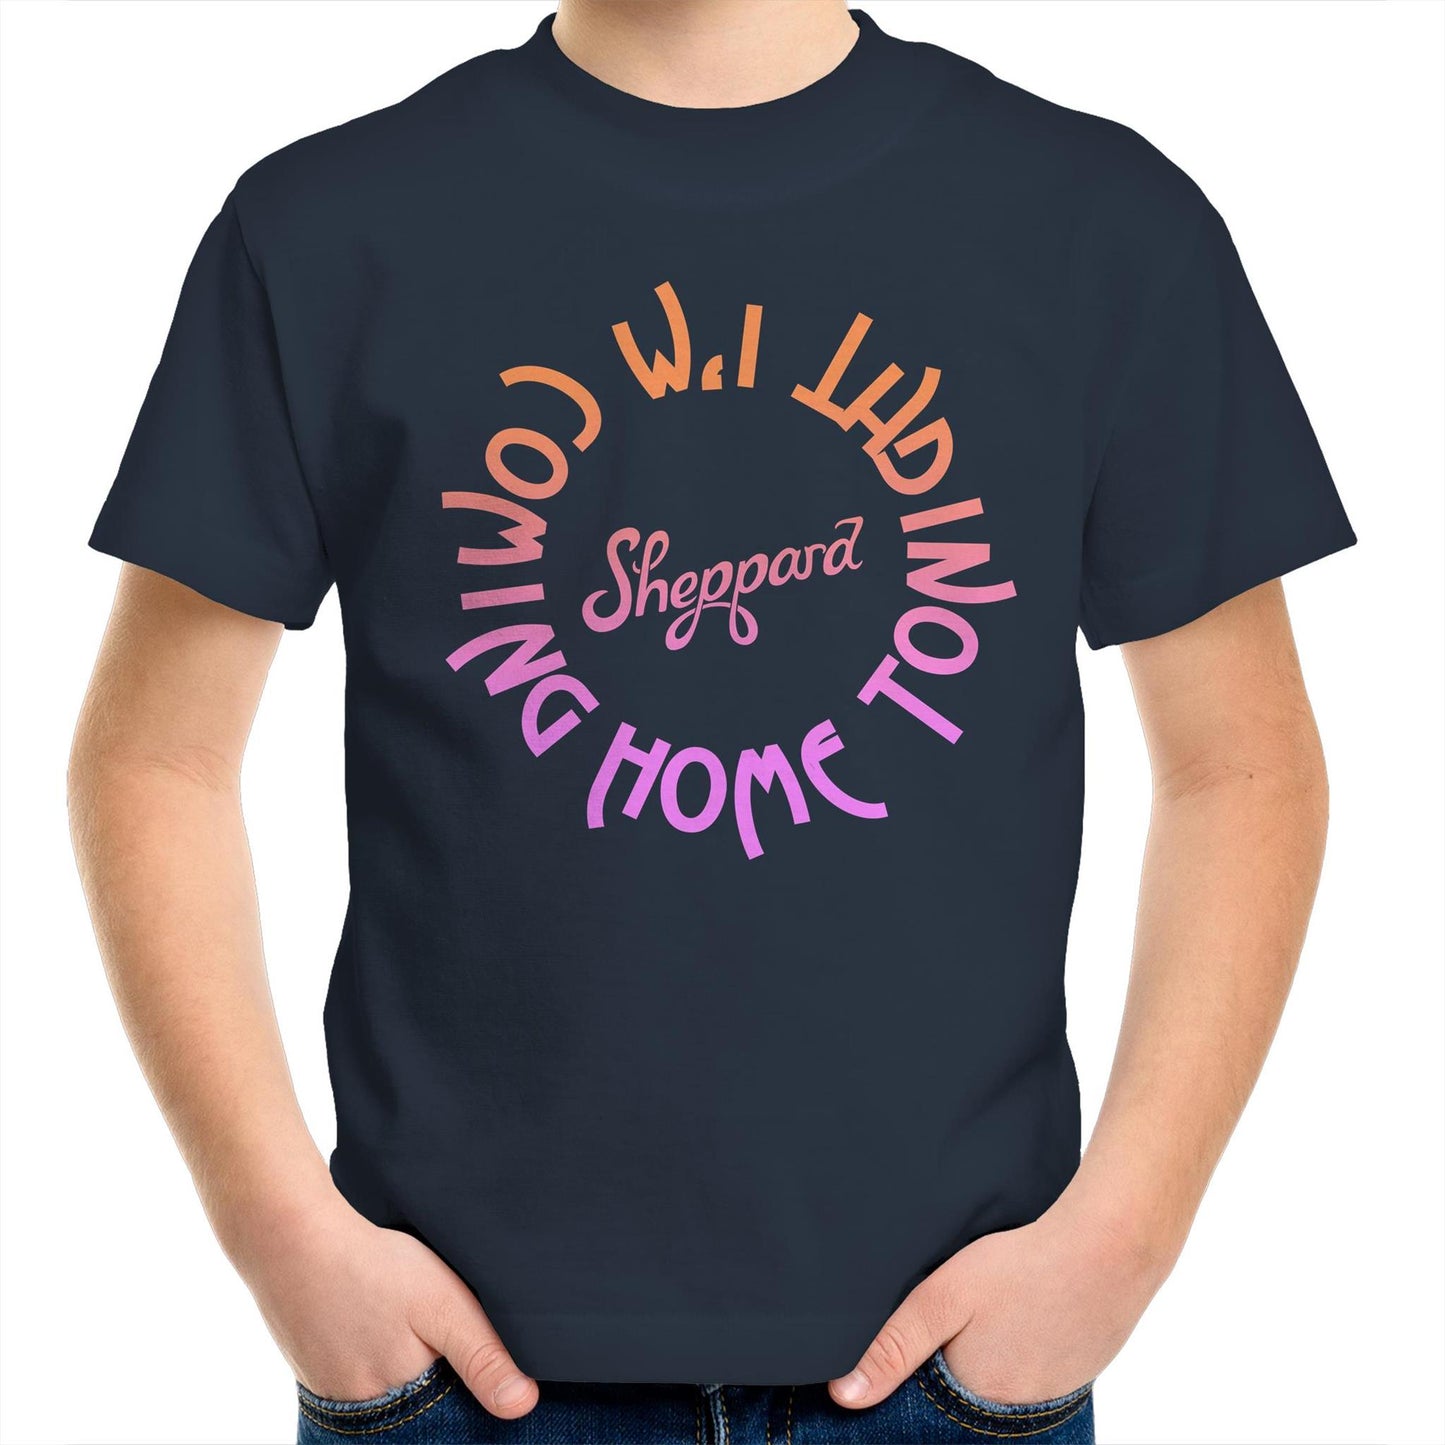 NEW! Coming Home - Kids T-Shirt